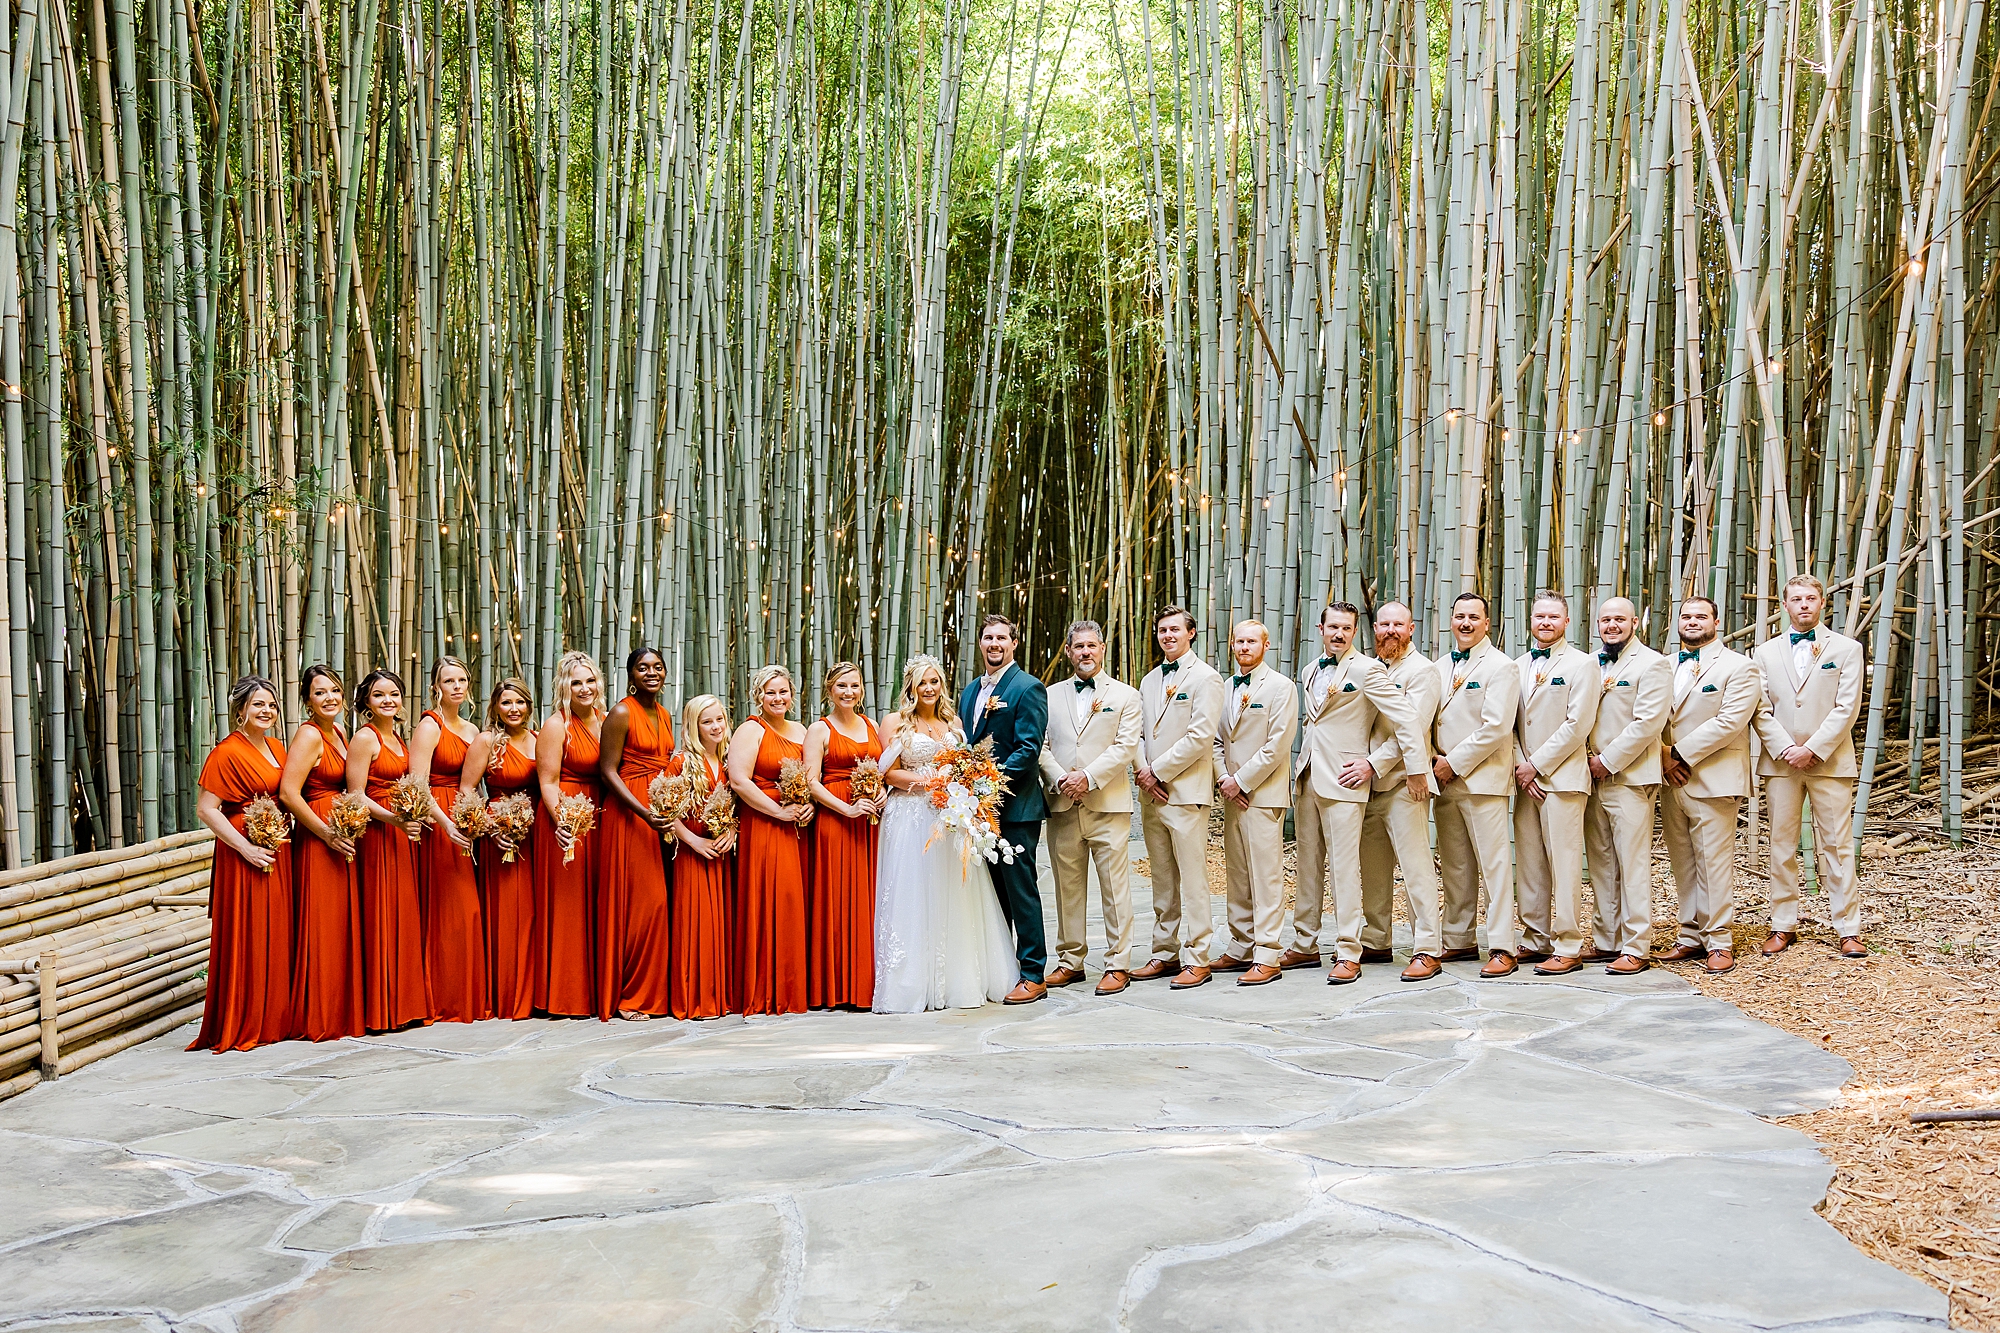 newlyweds pose with wedding party in tan and burnt orange in bamboo forest at Camelot Meadows